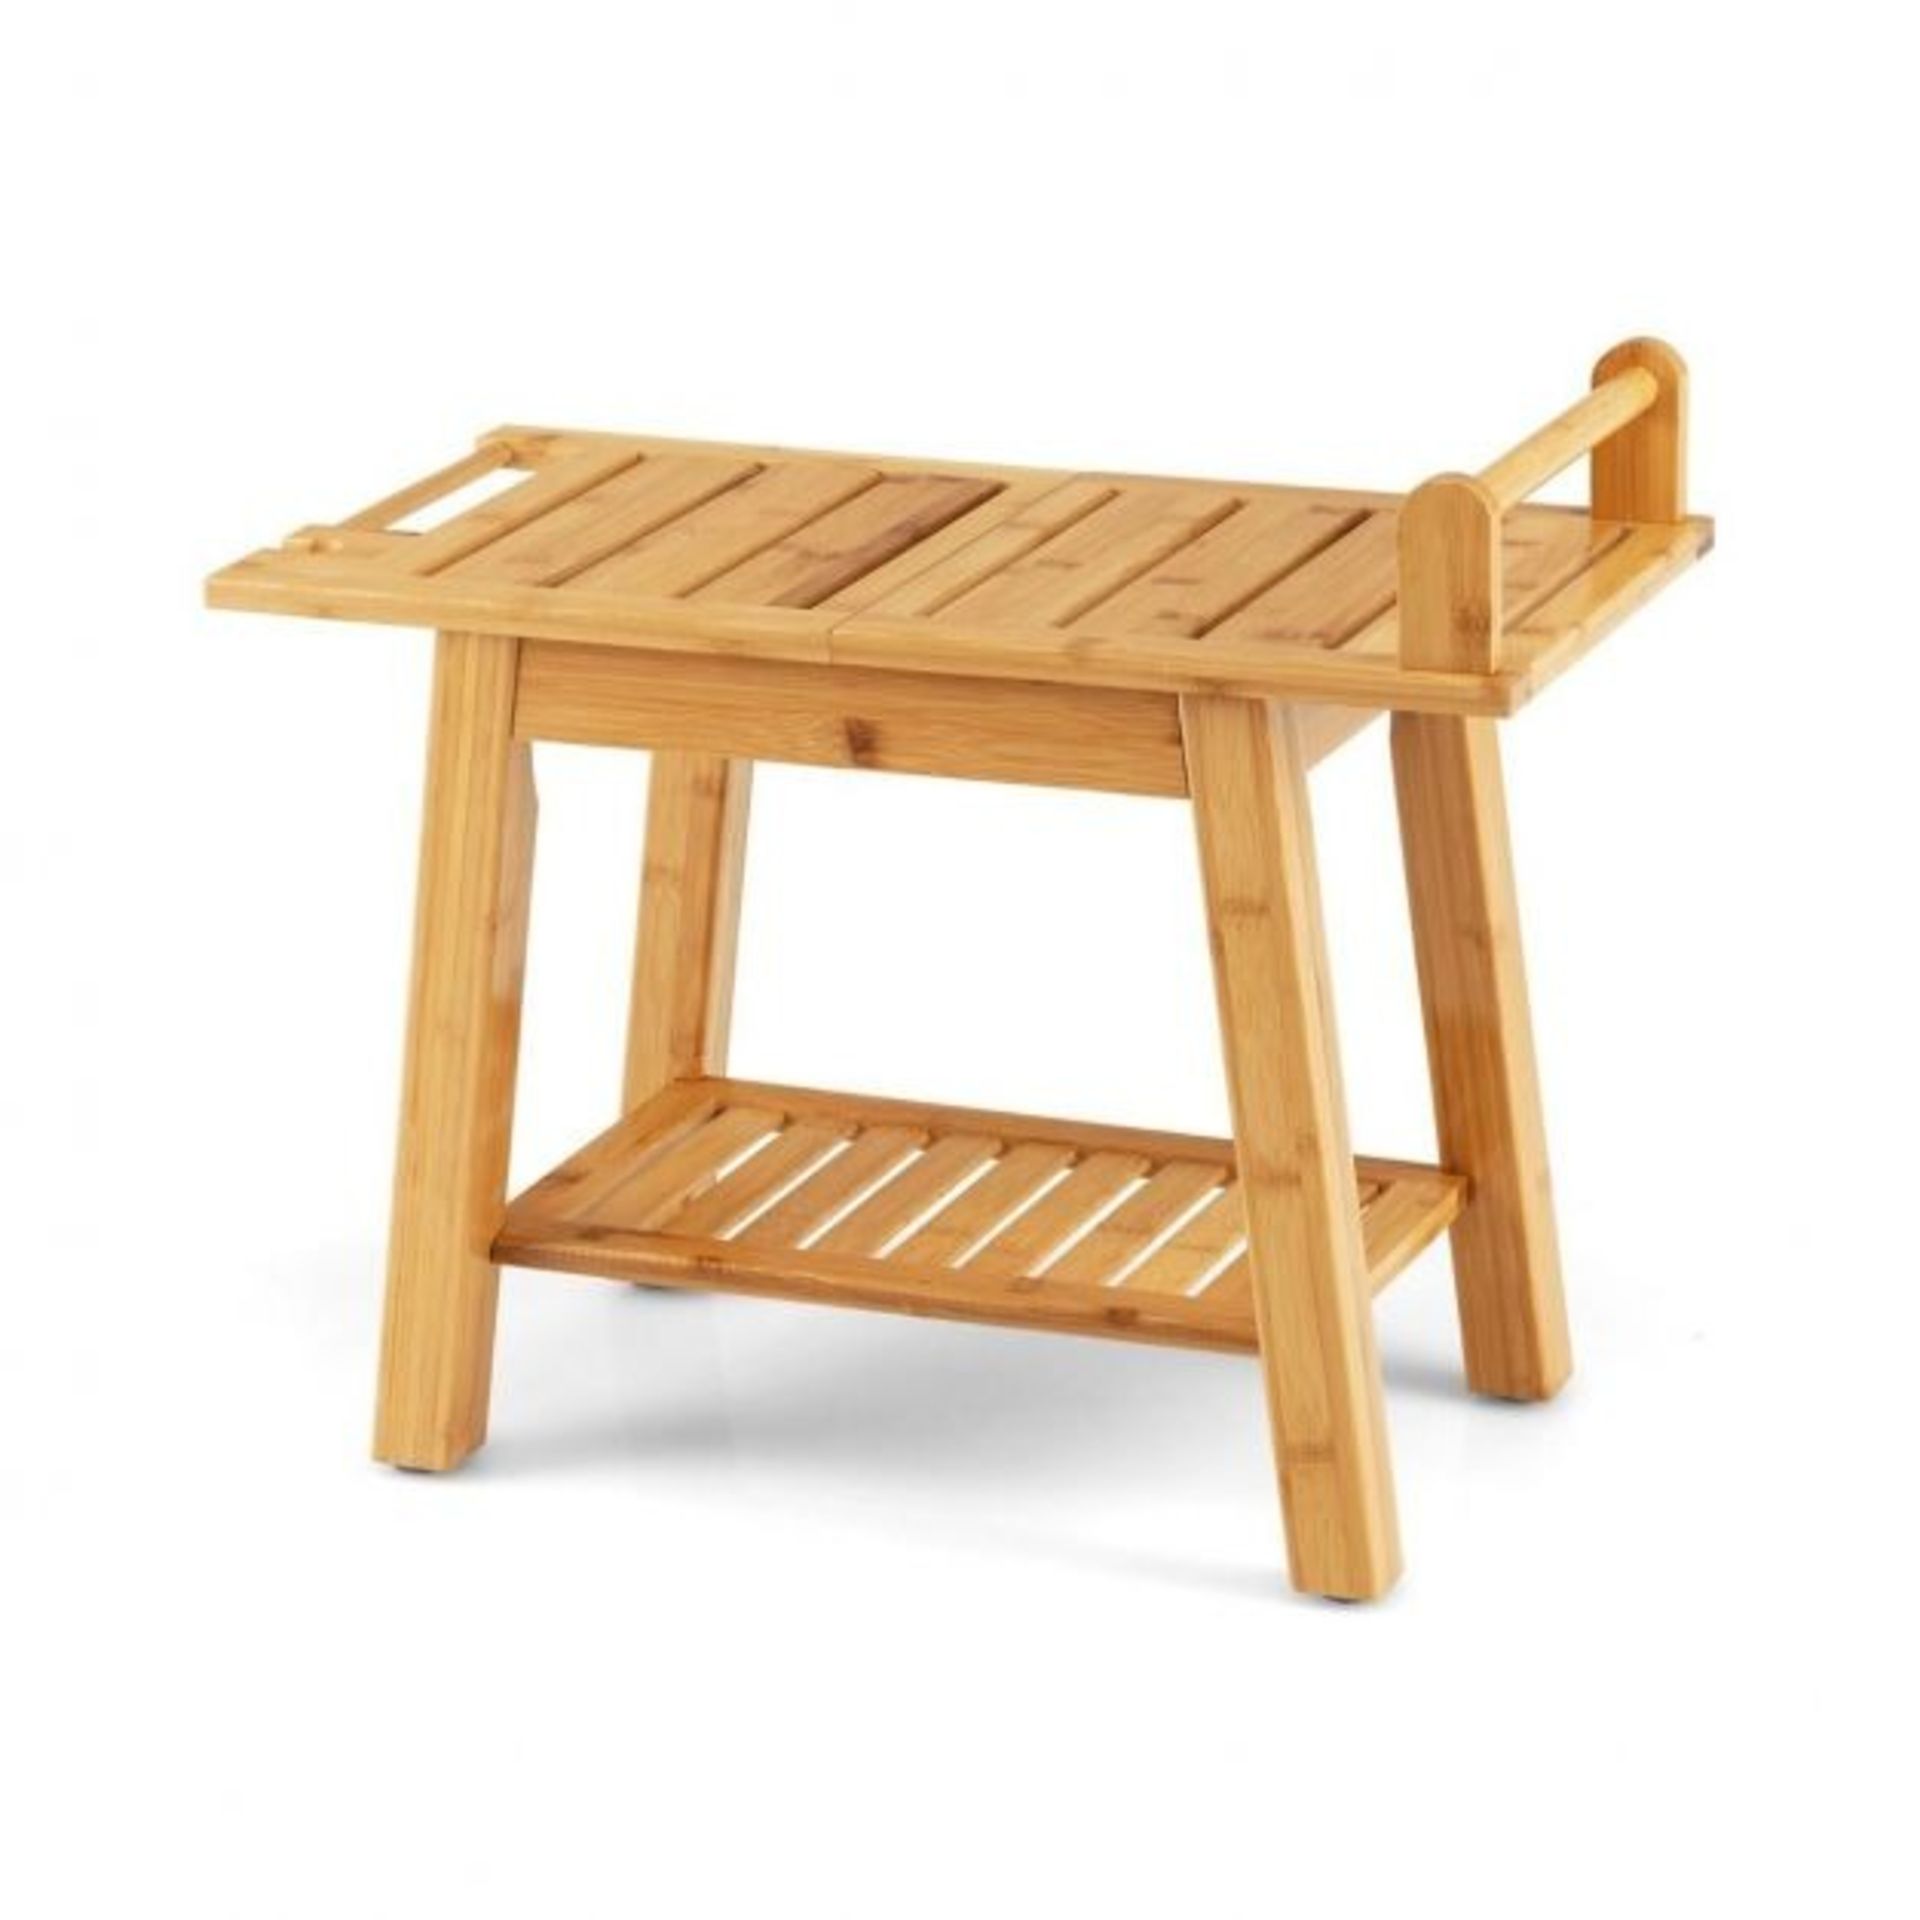 Bamboo Shower Bench with Storage Shelf - ER53 *Design may vary